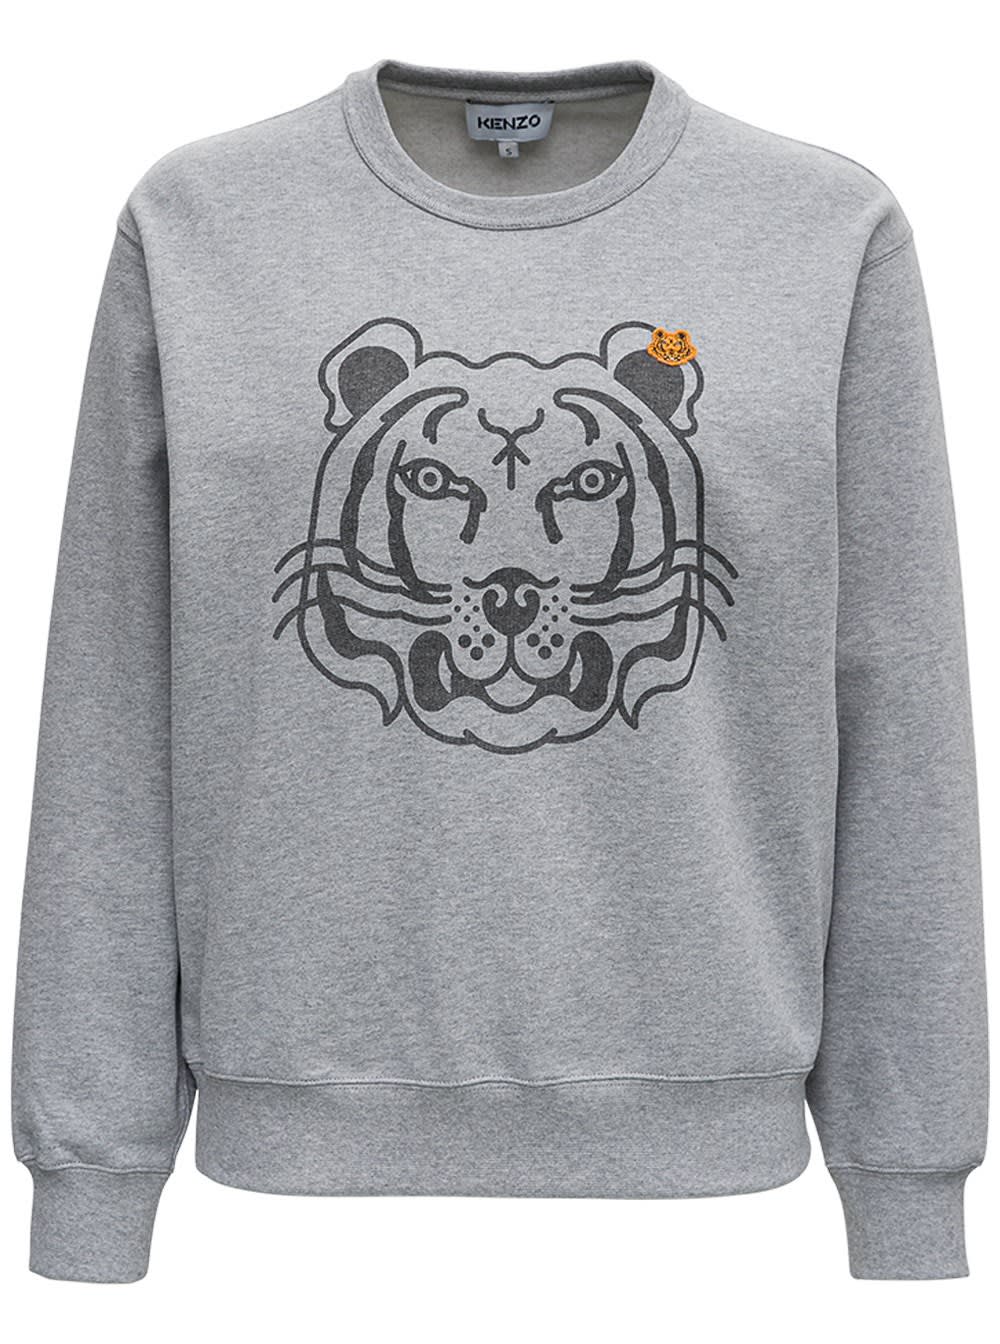 Kenzo Gray Jersey Sweatshirt With Front Tiger Print